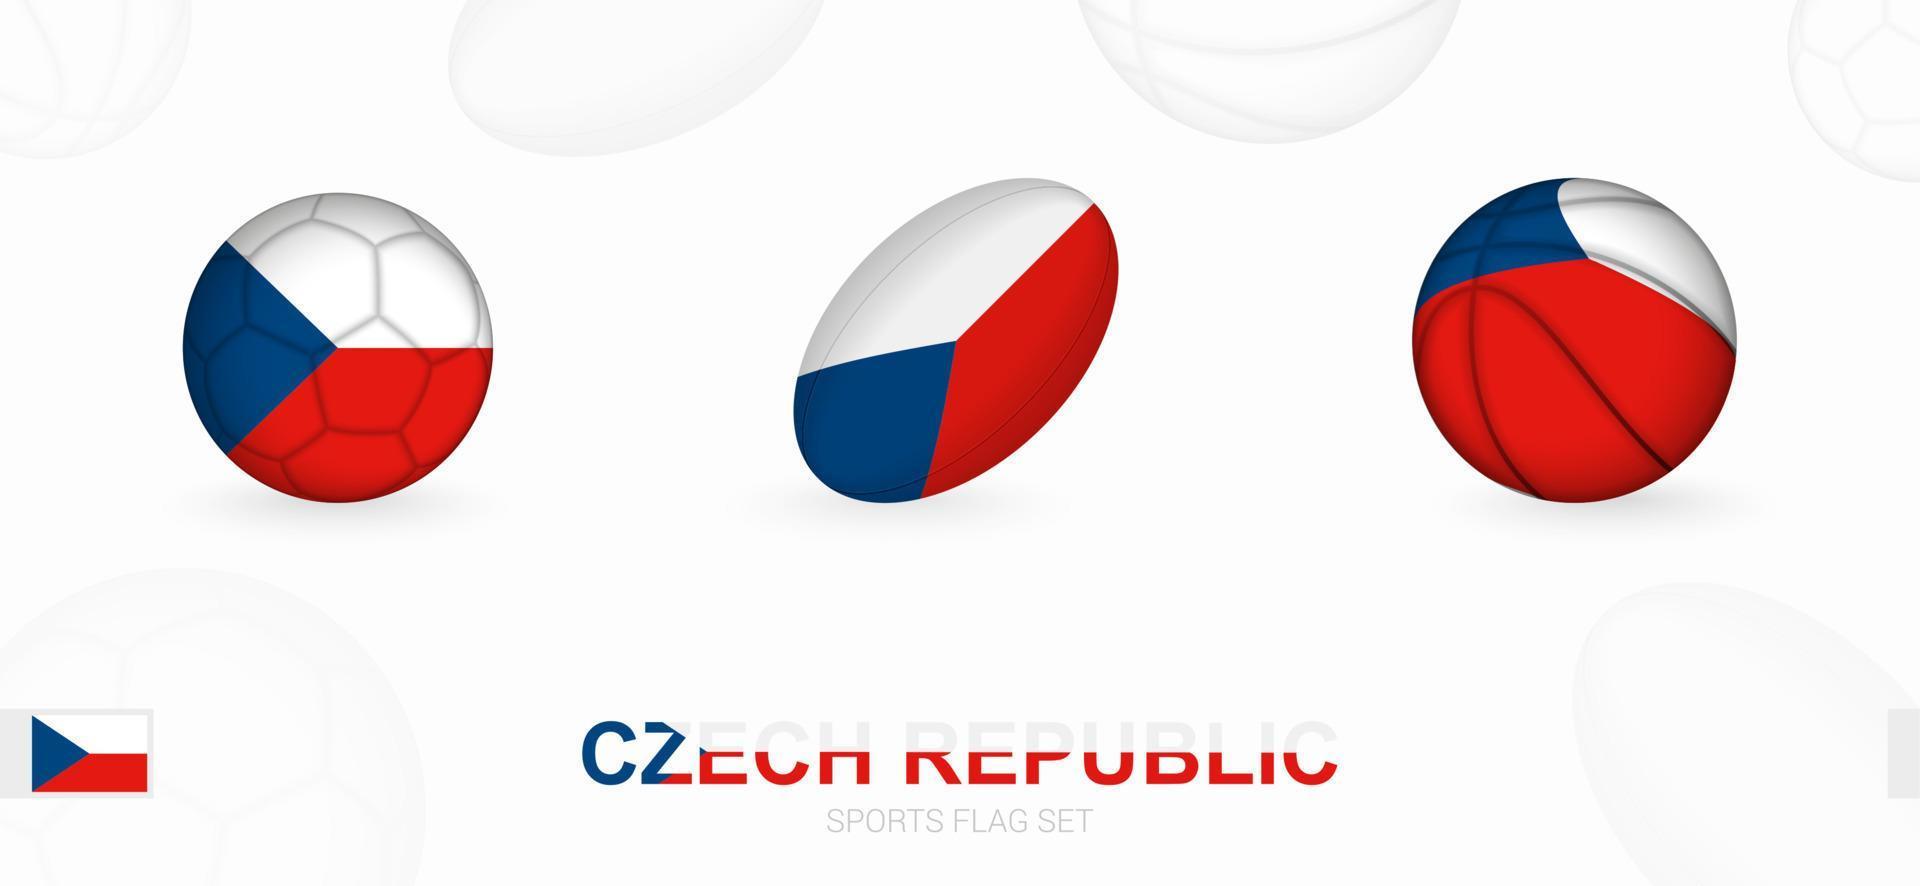 Sports icons for football, rugby and basketball with the flag of Czech Republic. vector